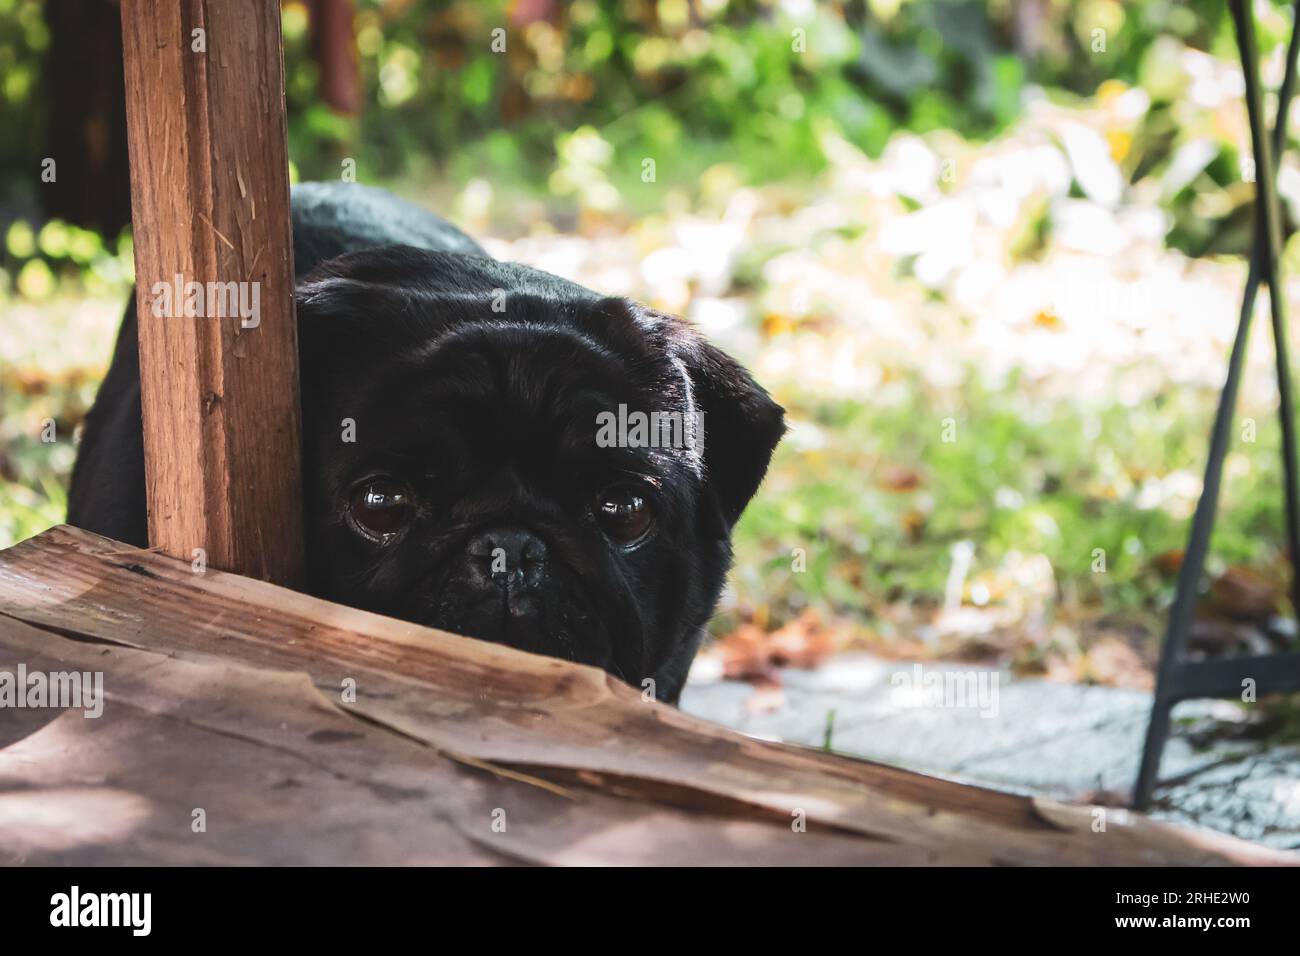 Black pug playing hide and seek. Funny mops face. Best human friend. Domestic dogs concept. Black pug looking at camera. Small black dog. Stock Photo